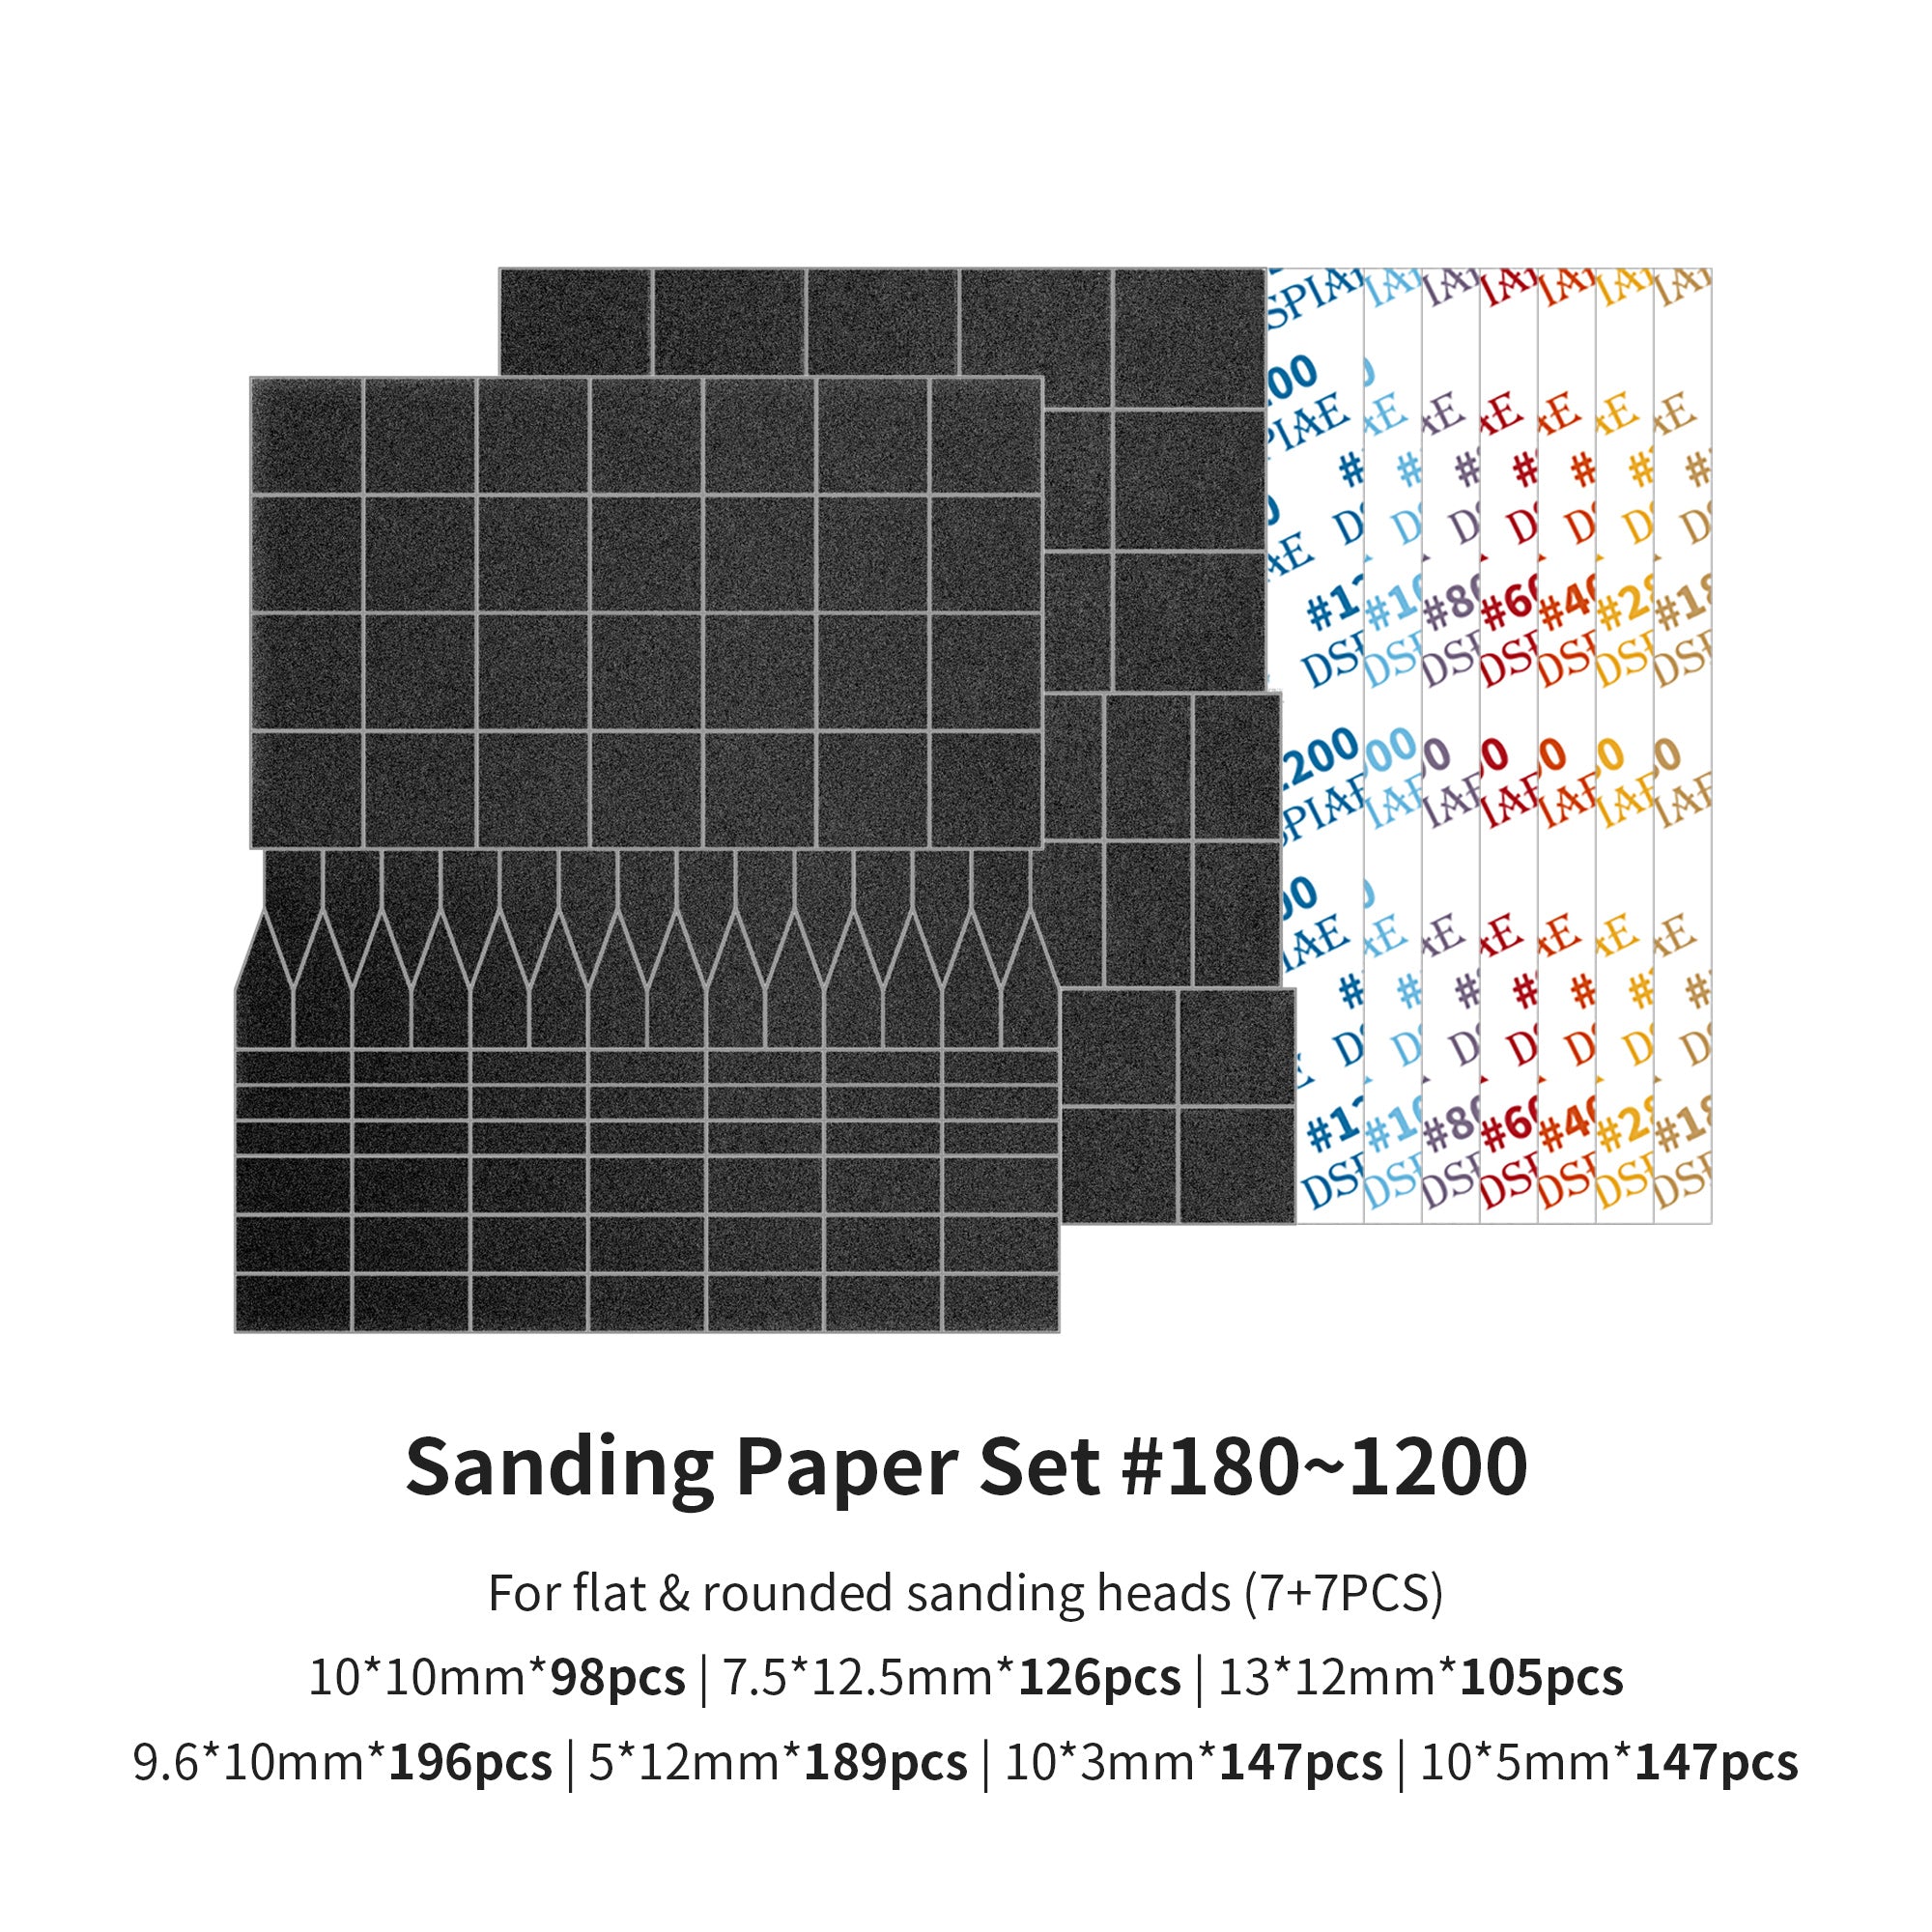 MSP-ESS Sanding paper for DSPIAE ES-A RECIPROCATING SANDER (Flat & Rounded head 7+7 pcs)